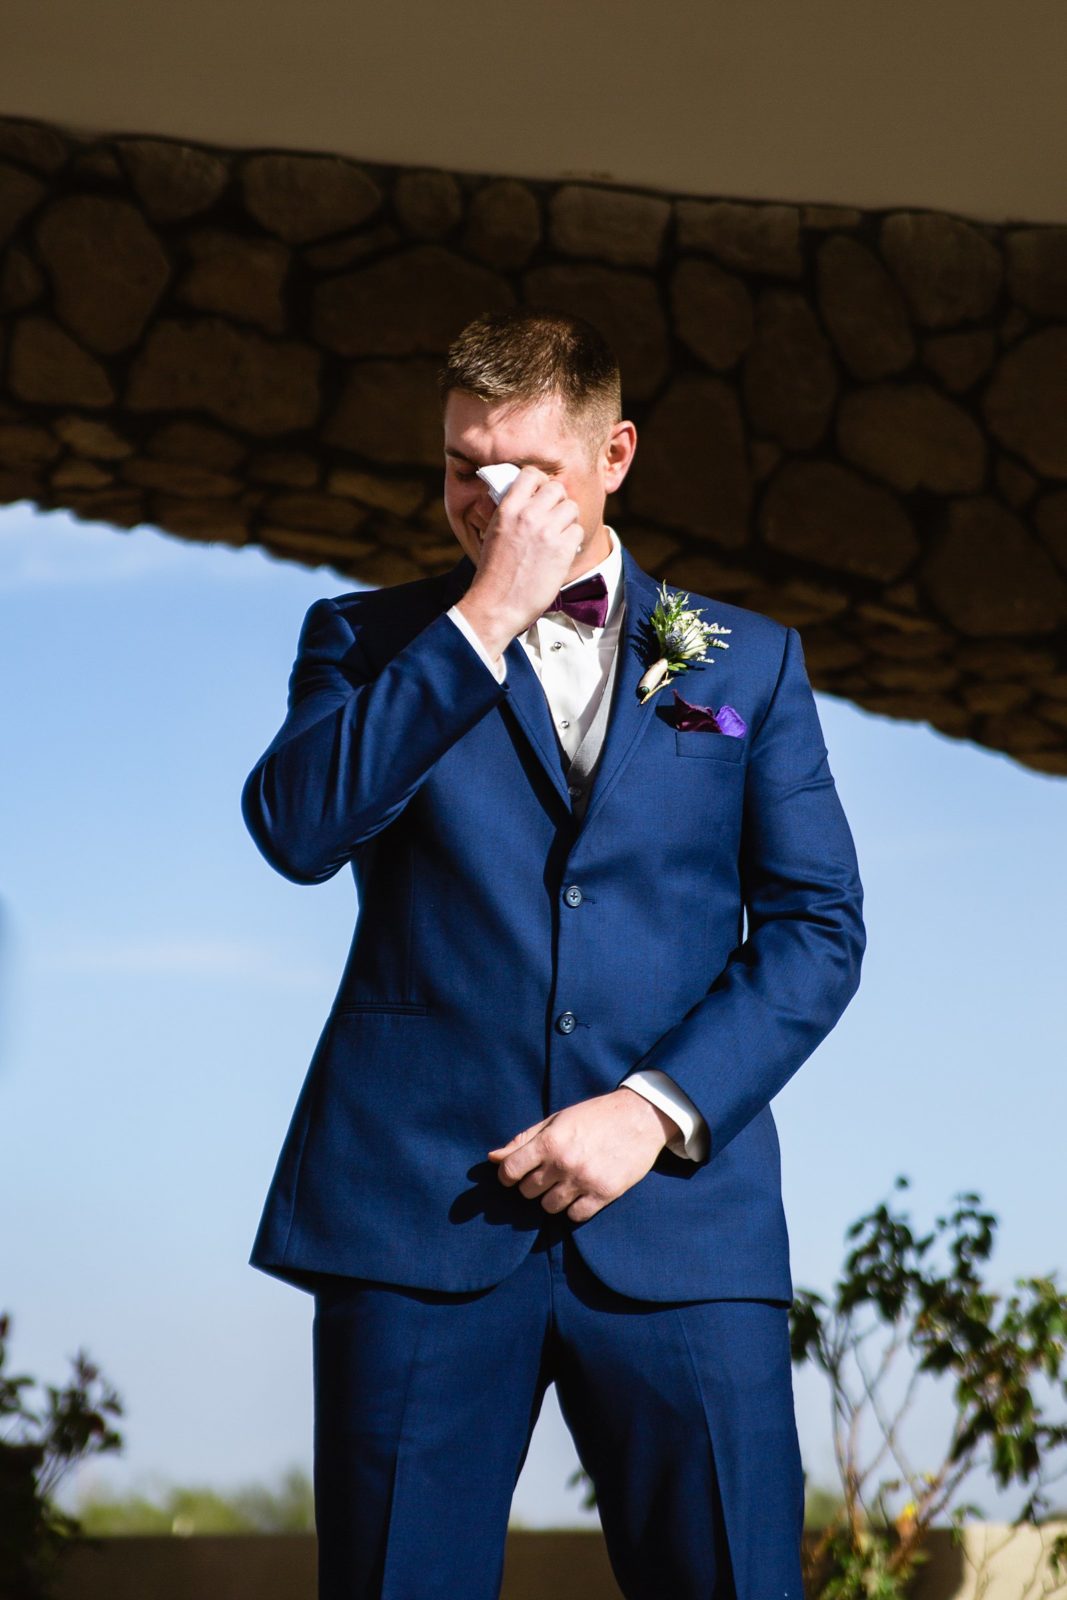 Groom wiping his tears with a hankie as the bride walks down the aisle by PMA Photography.